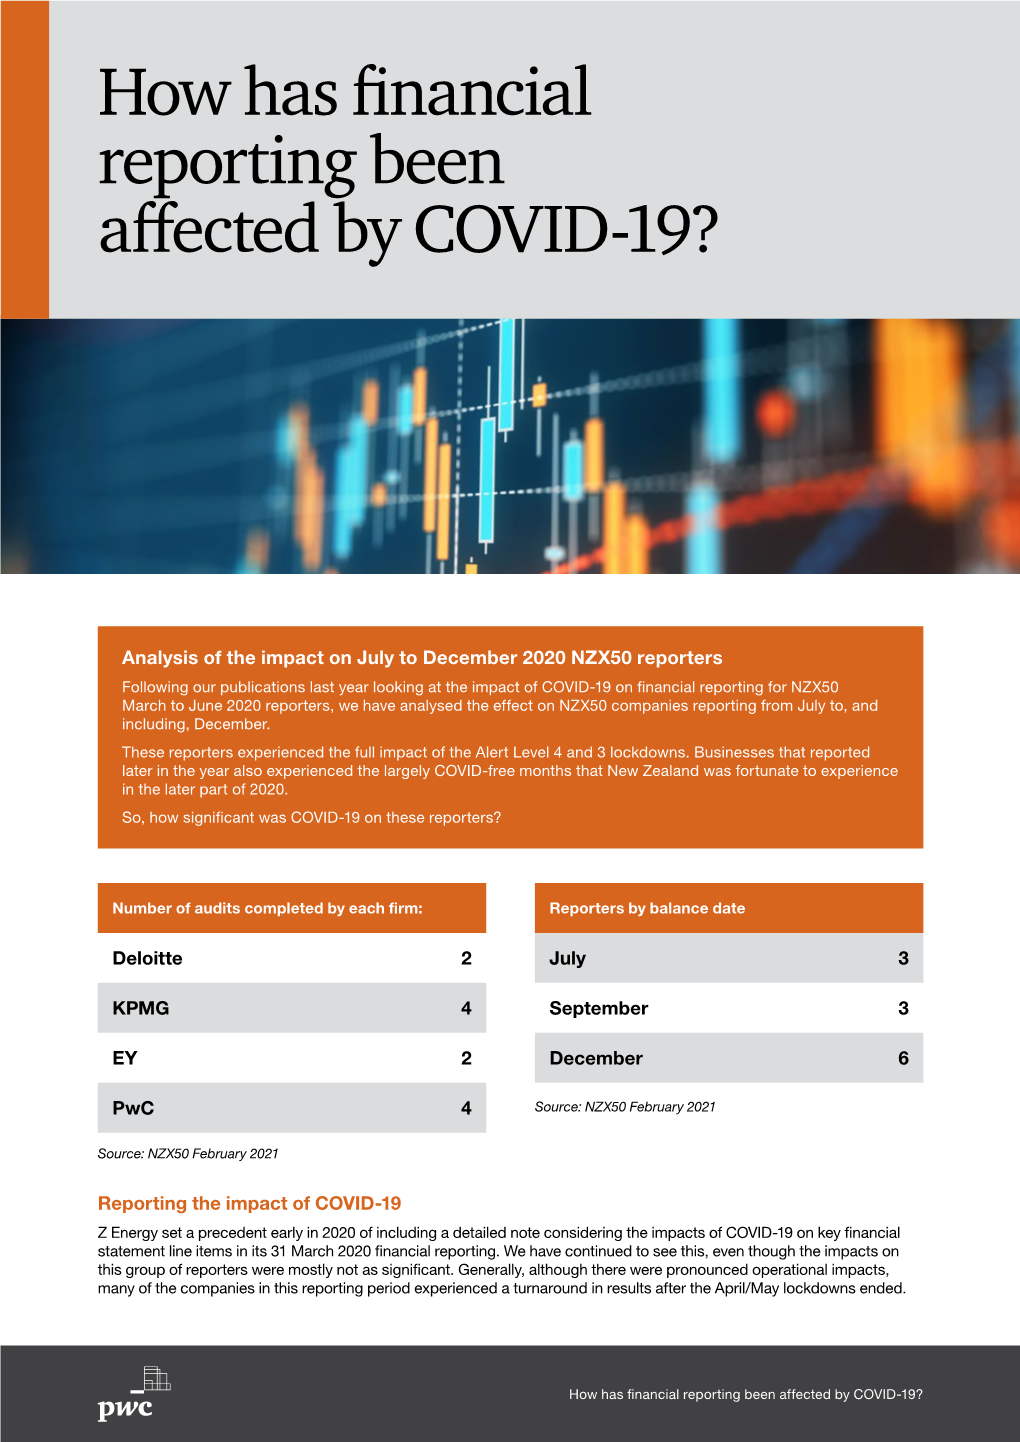 How Has Financial Reporting Been Affected by COVID-19?